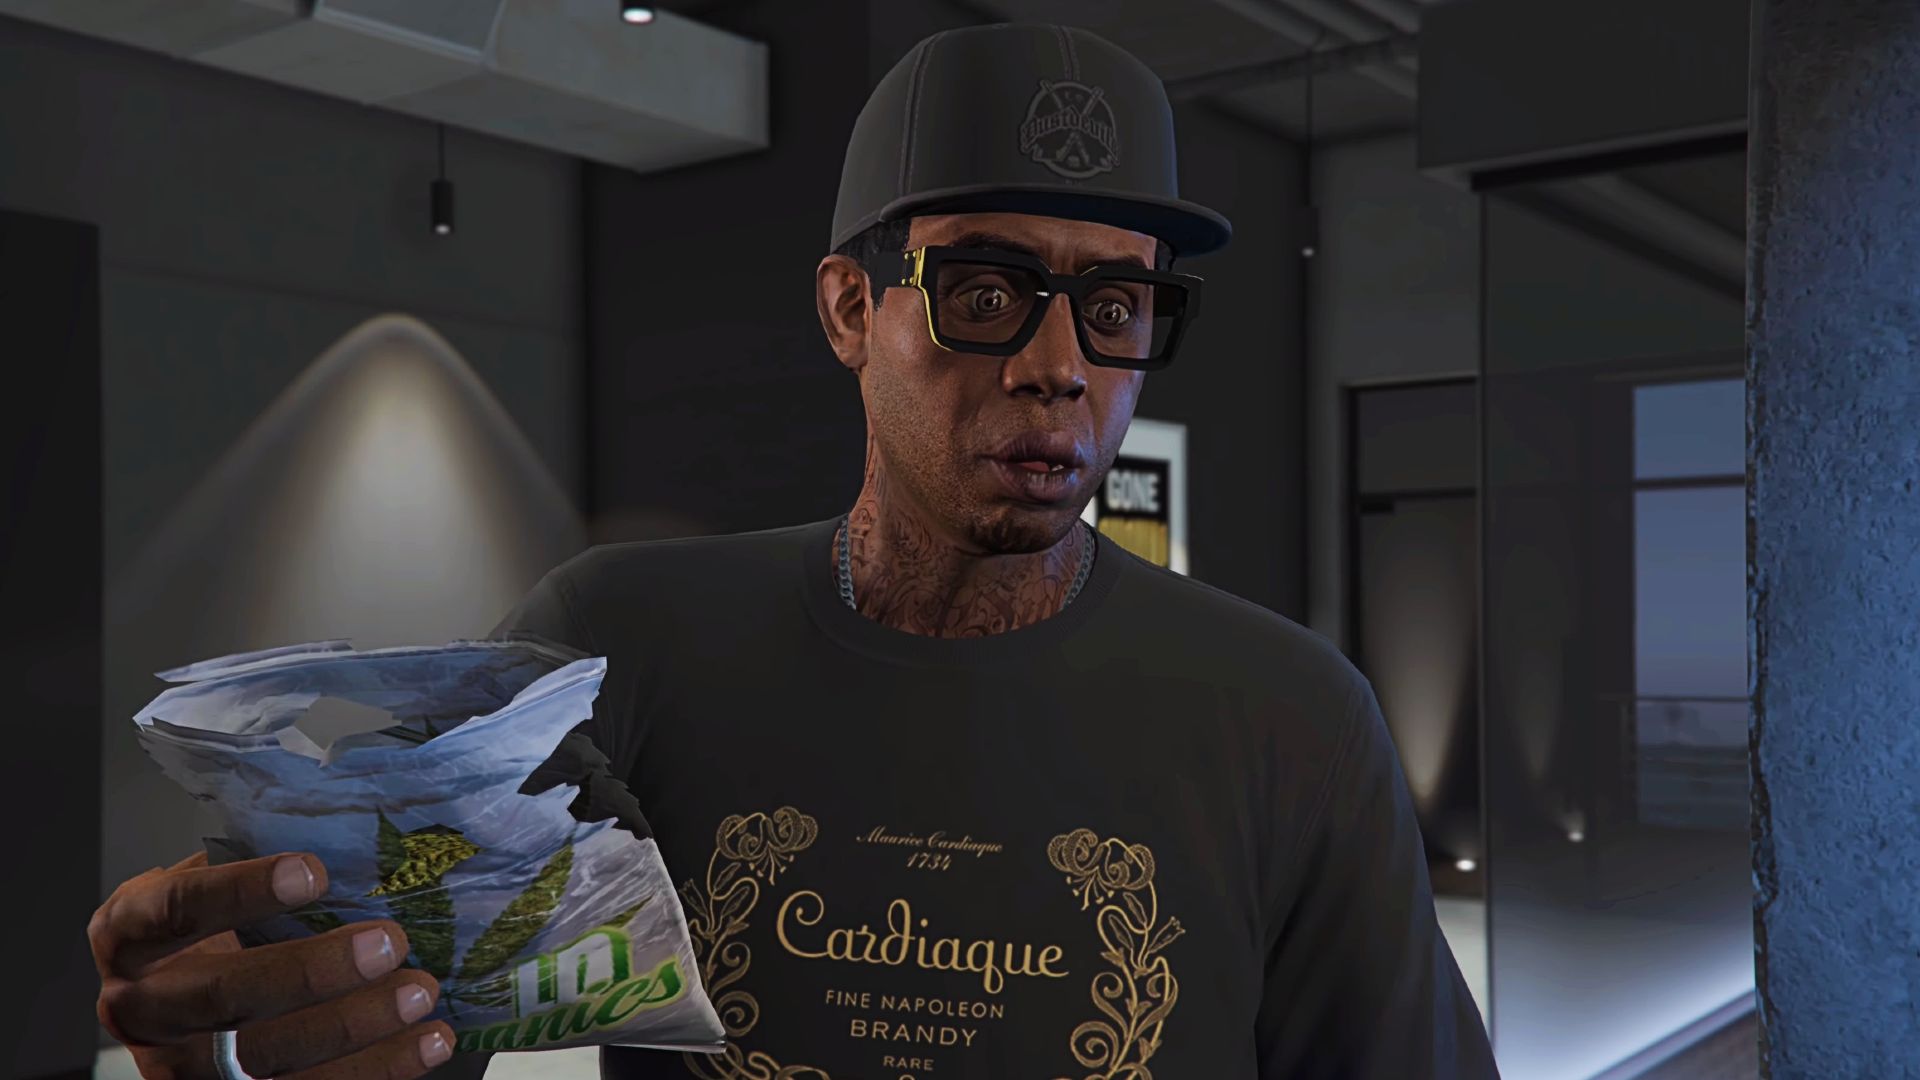 The Contract Adds Much Needed Single Player Content to GTA Online 